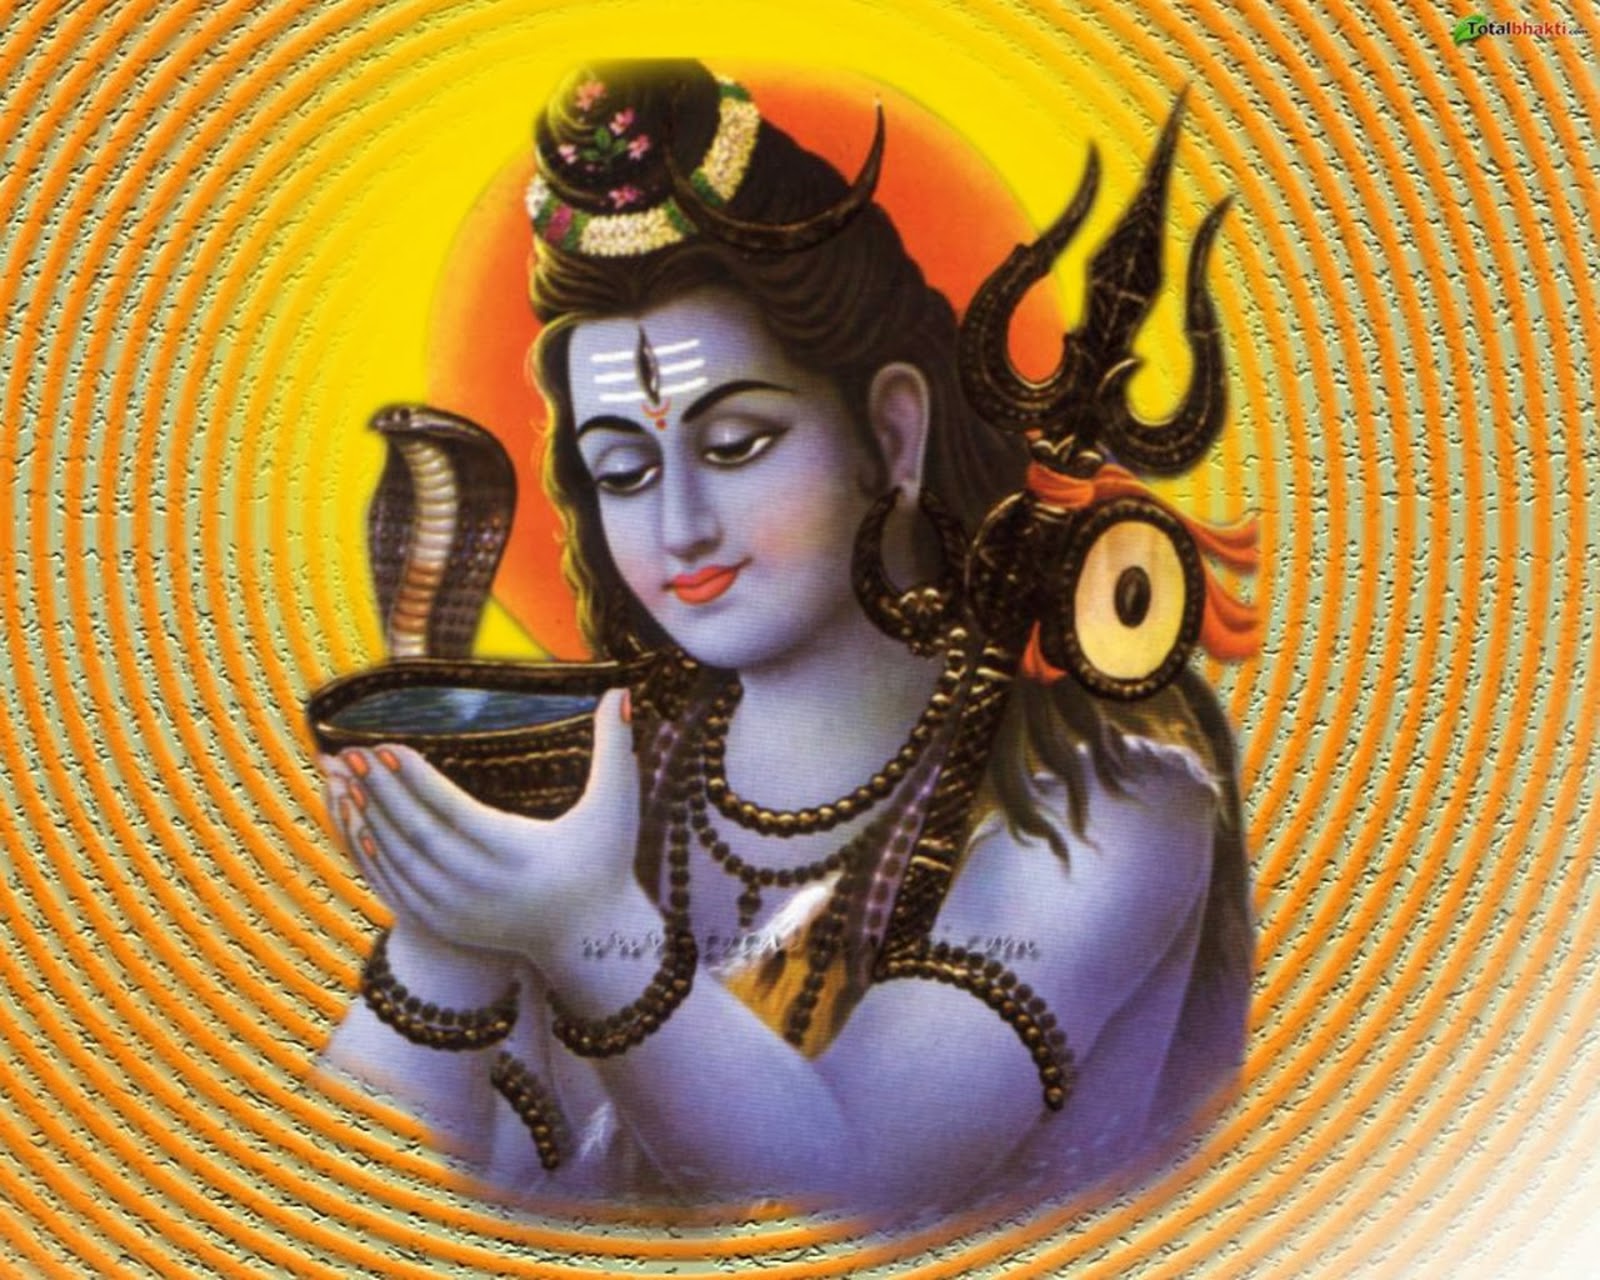 Sweta's Collections: Lord Shiva Images